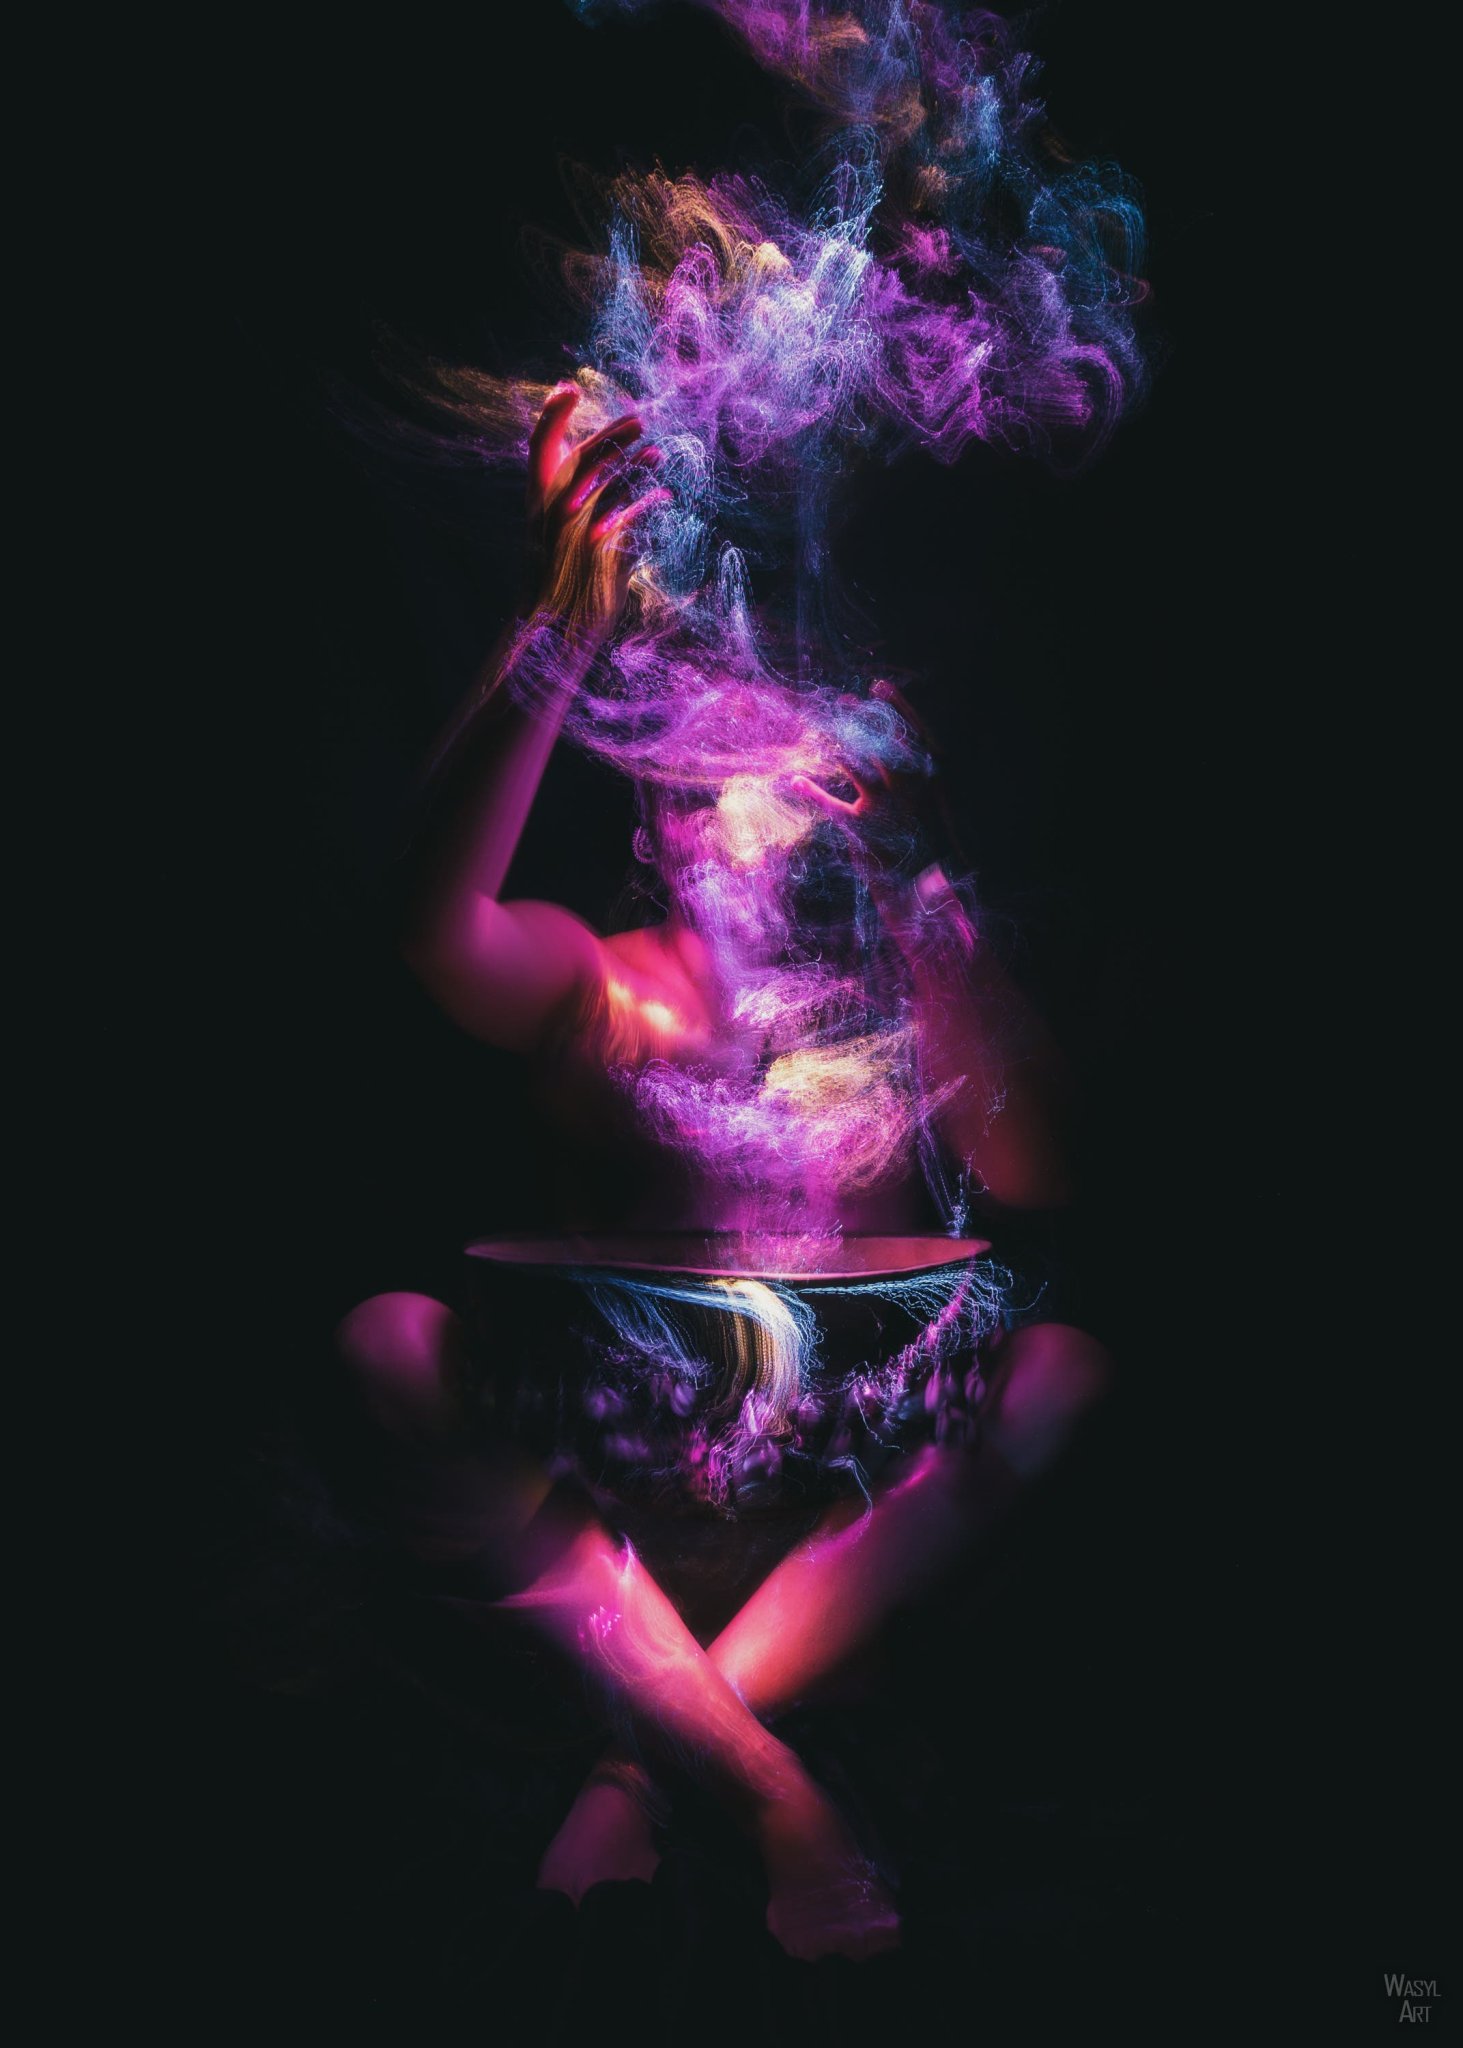 Wasyl Art Captures the Soul’s Energy with Light Painting (NSFW)